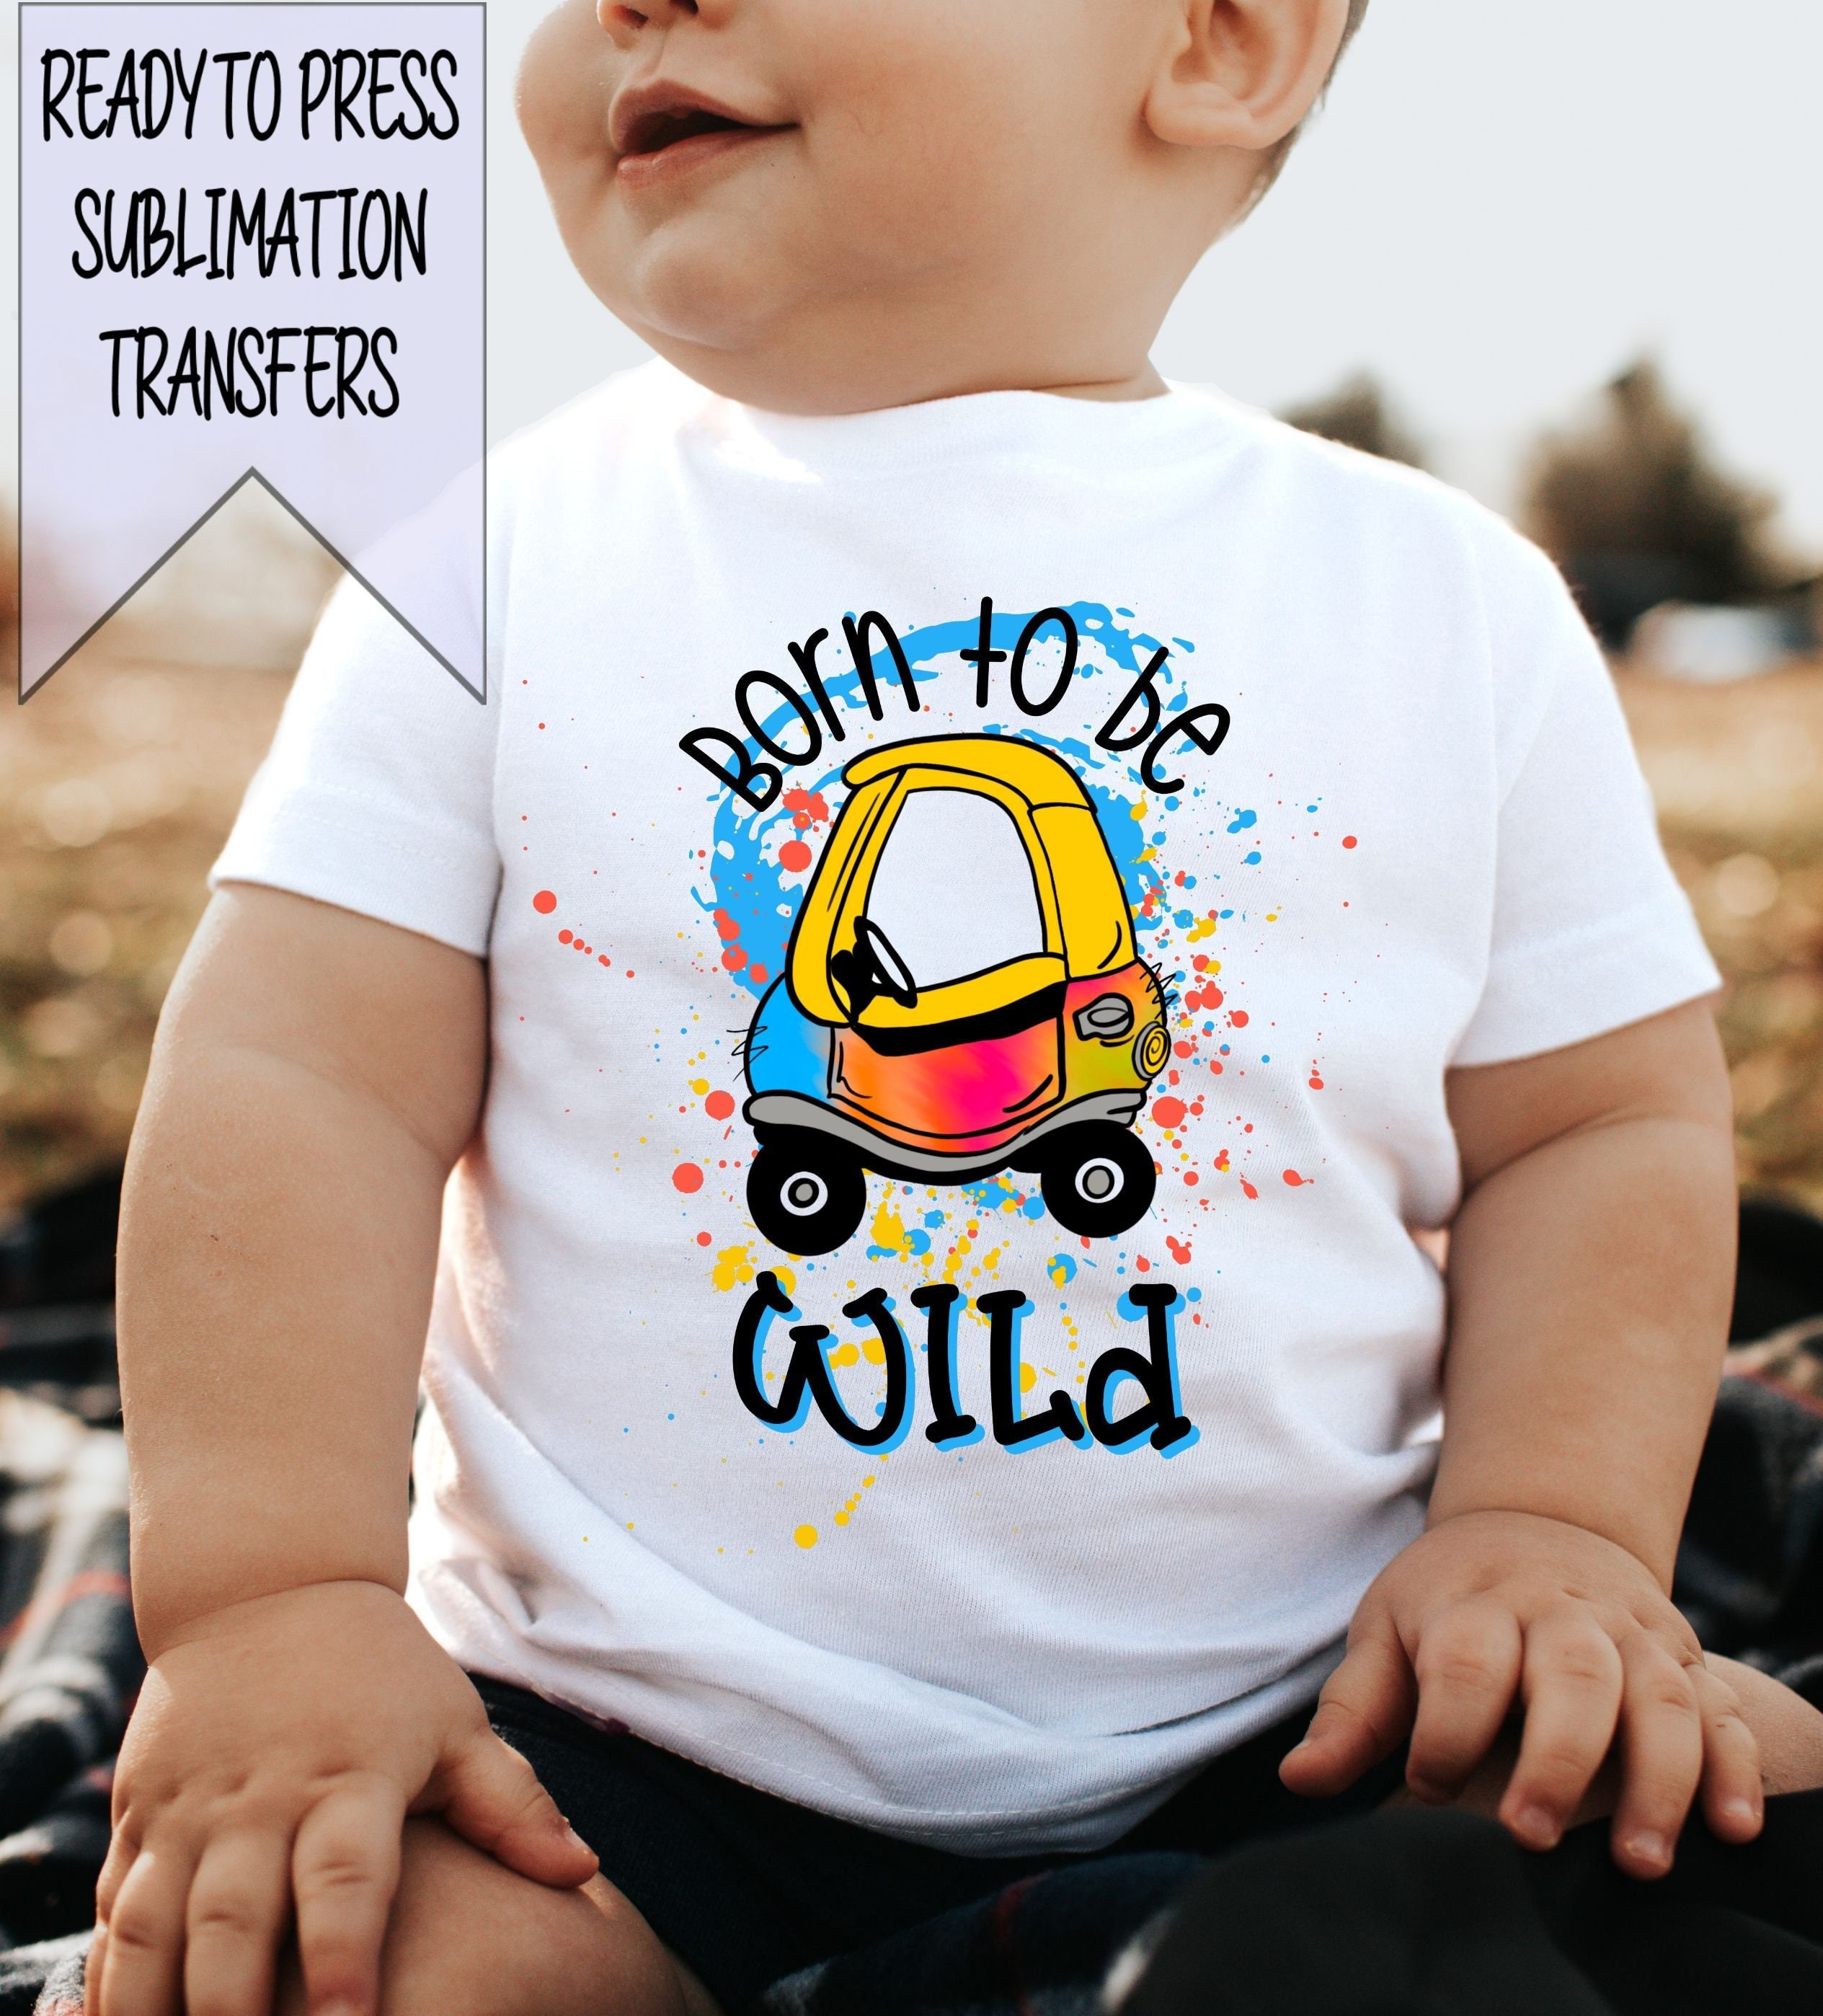 Wild Child Sublimation Transfer, Ready To Press, Heat Press Transfer,  Sublimation Print